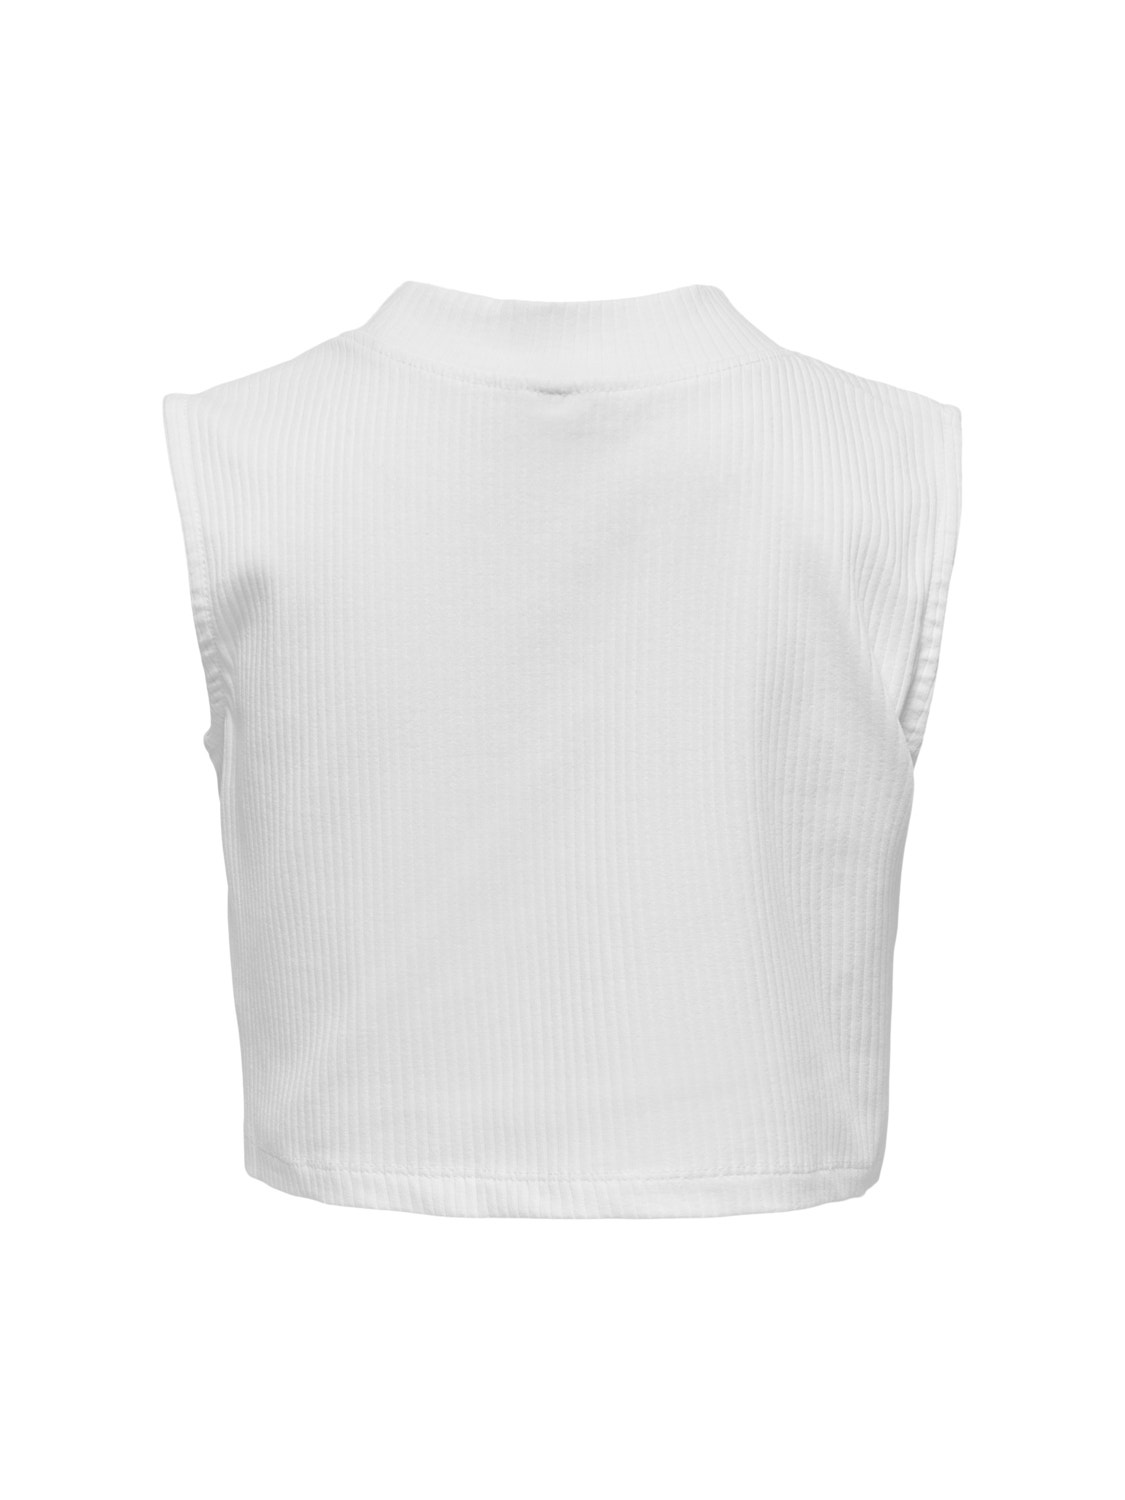 ONLY Cropped High Neck Top -Bright White - 15264306